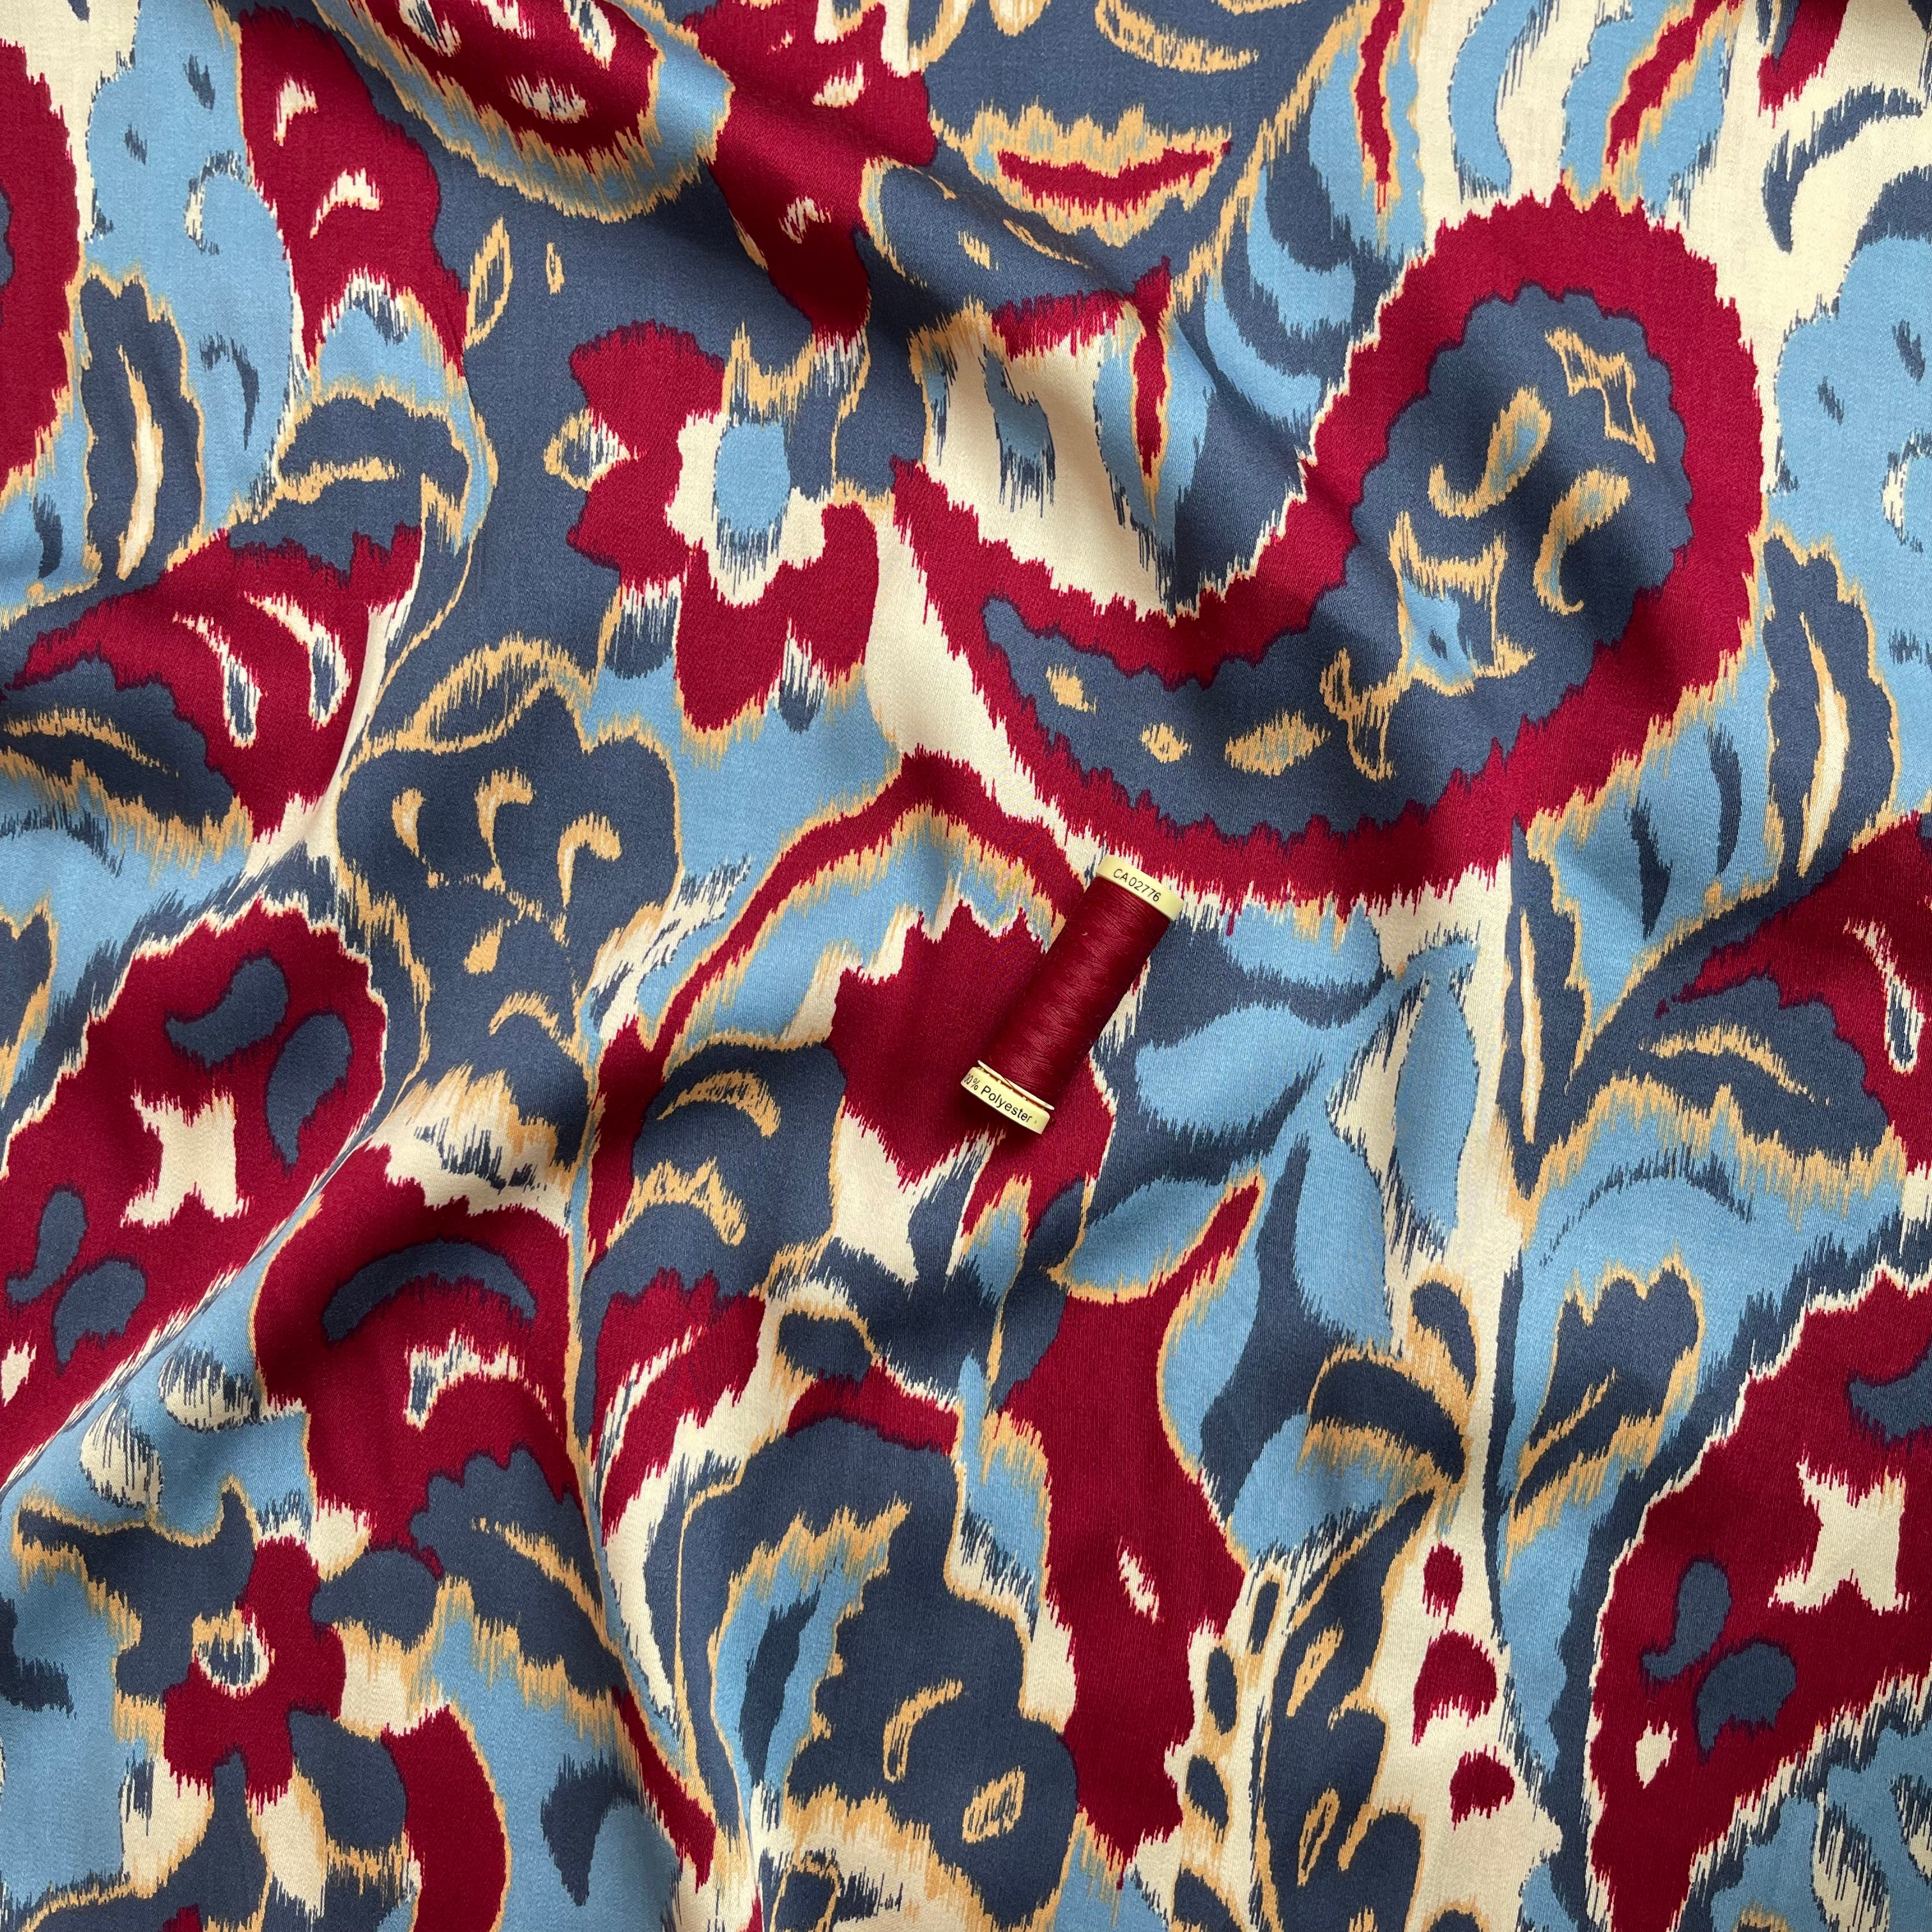 REMNANT 2.45 Metres - Hazy Paisley Blue and Red Viscose Sateen Fabric